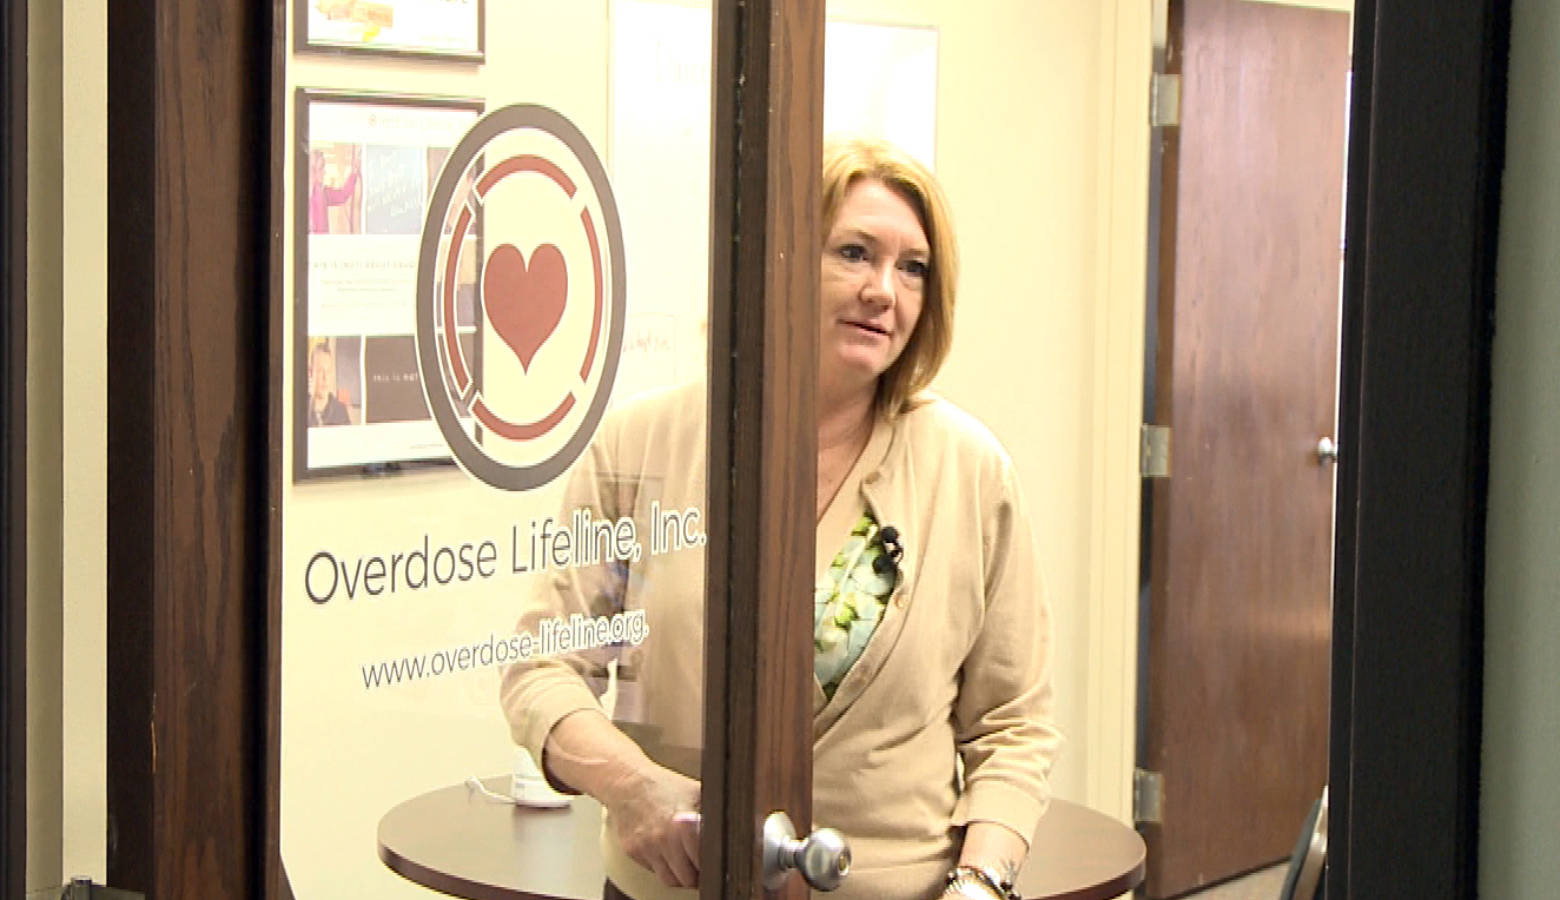 Overdose Lifeline executive director Justin Phillips says faith groups are "a natural place" for people with a substance use disorder to go for help. (FILE PHOTO: Lindsey Wright/WTIU)